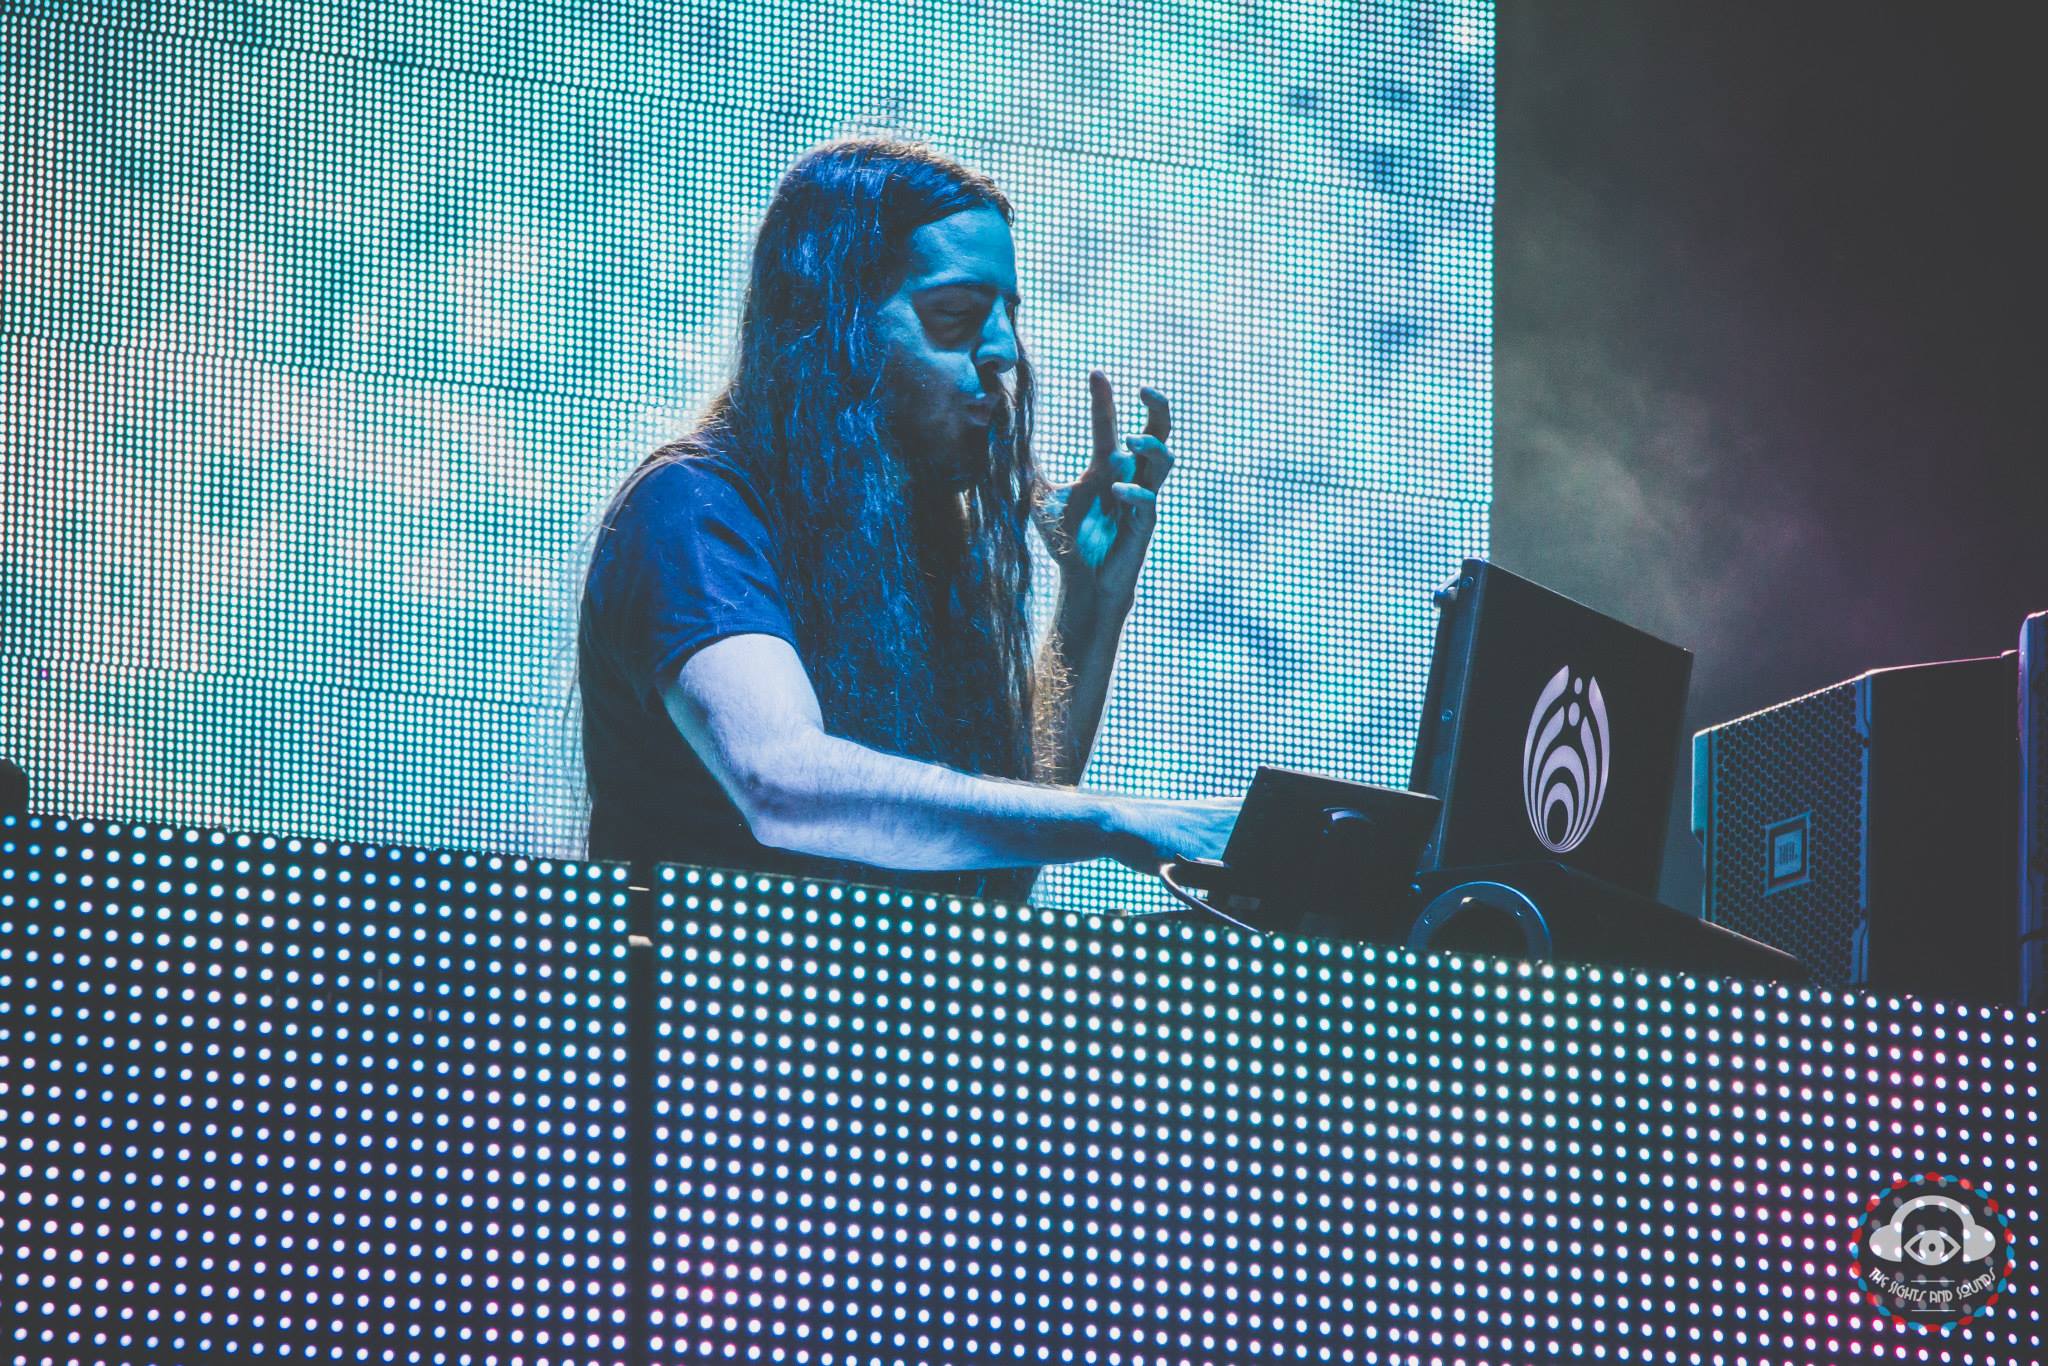 [QUICK MIX – BASS] Bassnectar Takes Over Insomniac’s Night Owl Radio